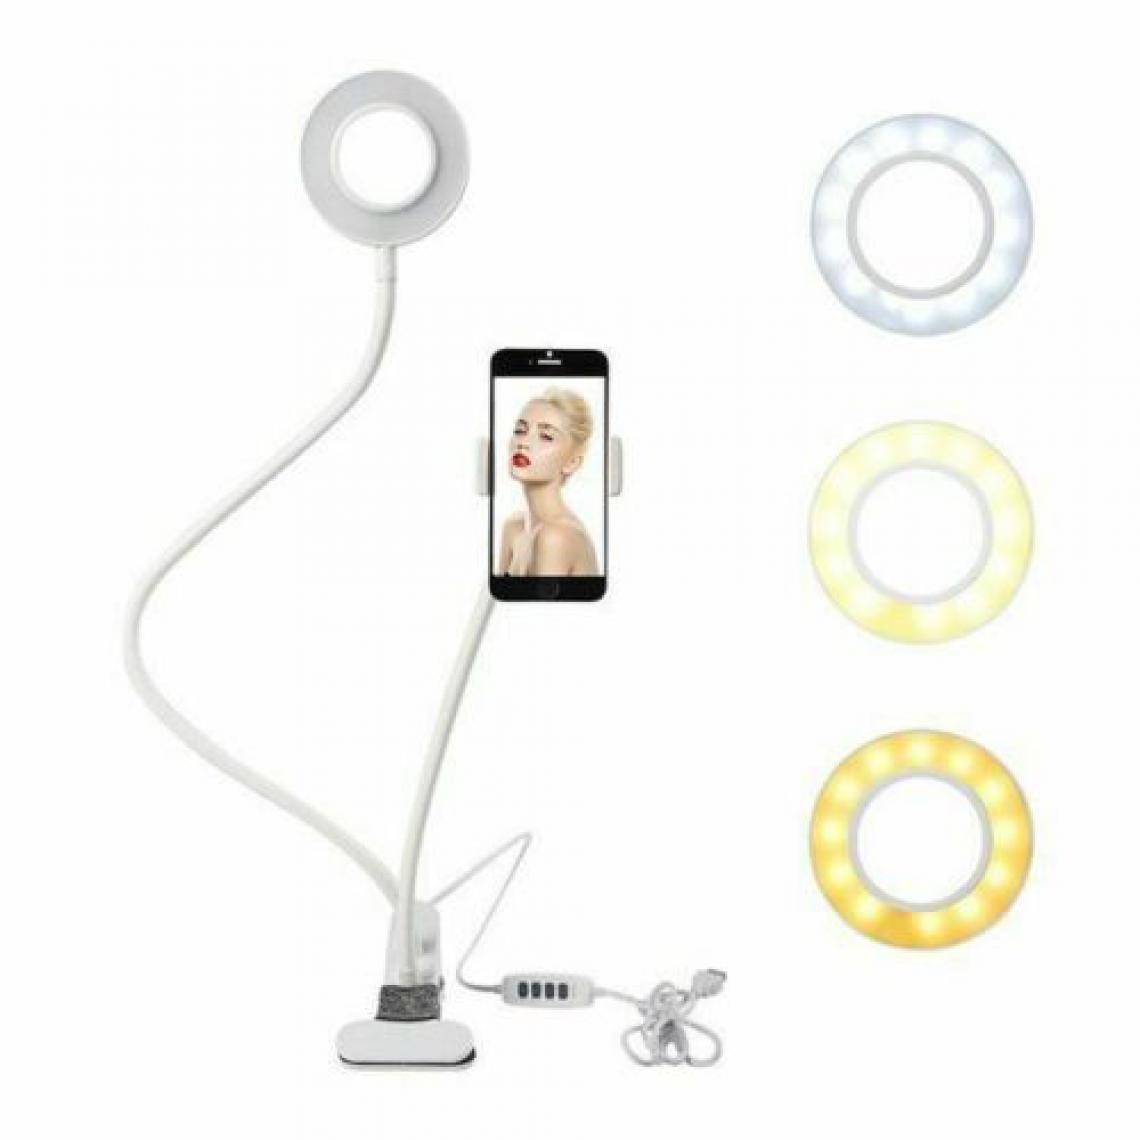 Ozzzo - Stand support bureau selfie led ozzzo blanc pour Doogee X5 3G Galicia - Station d'accueil smartphone